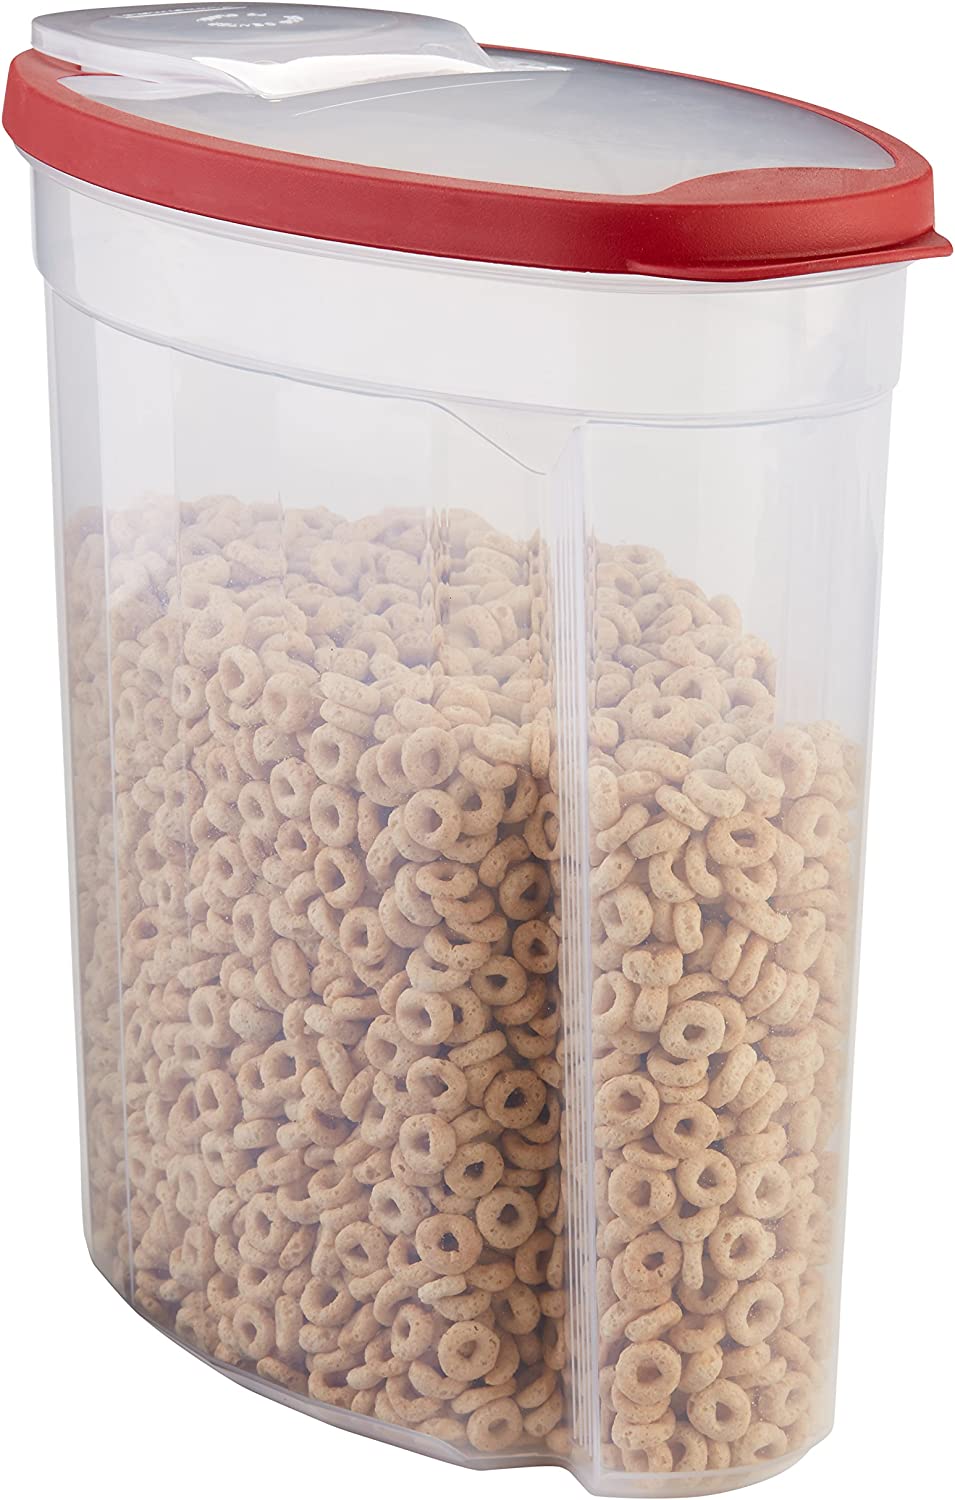 LANGMINGDE 1 Piece Cereal Containers Storage, 2.8L/95oz Airtight Large Dry  Food Storage Containers with Pouring Spout Measuring Cup for Snacks Grain